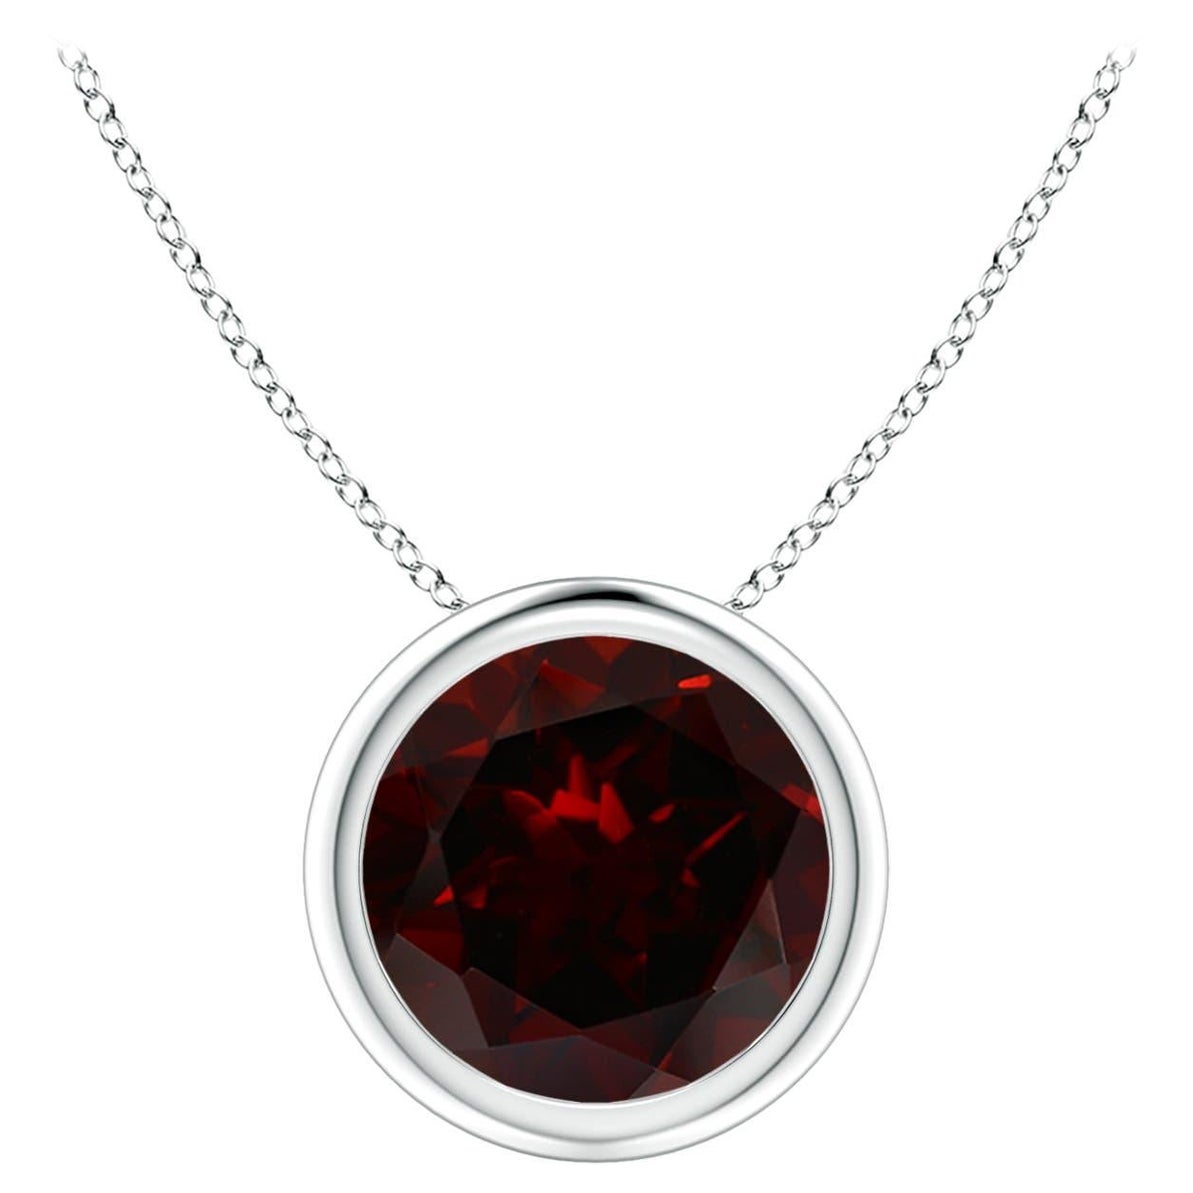 Natural Bezel-Set Round 2.2ct Garnet Solitaire Pendant in 14K White Gold For Sale